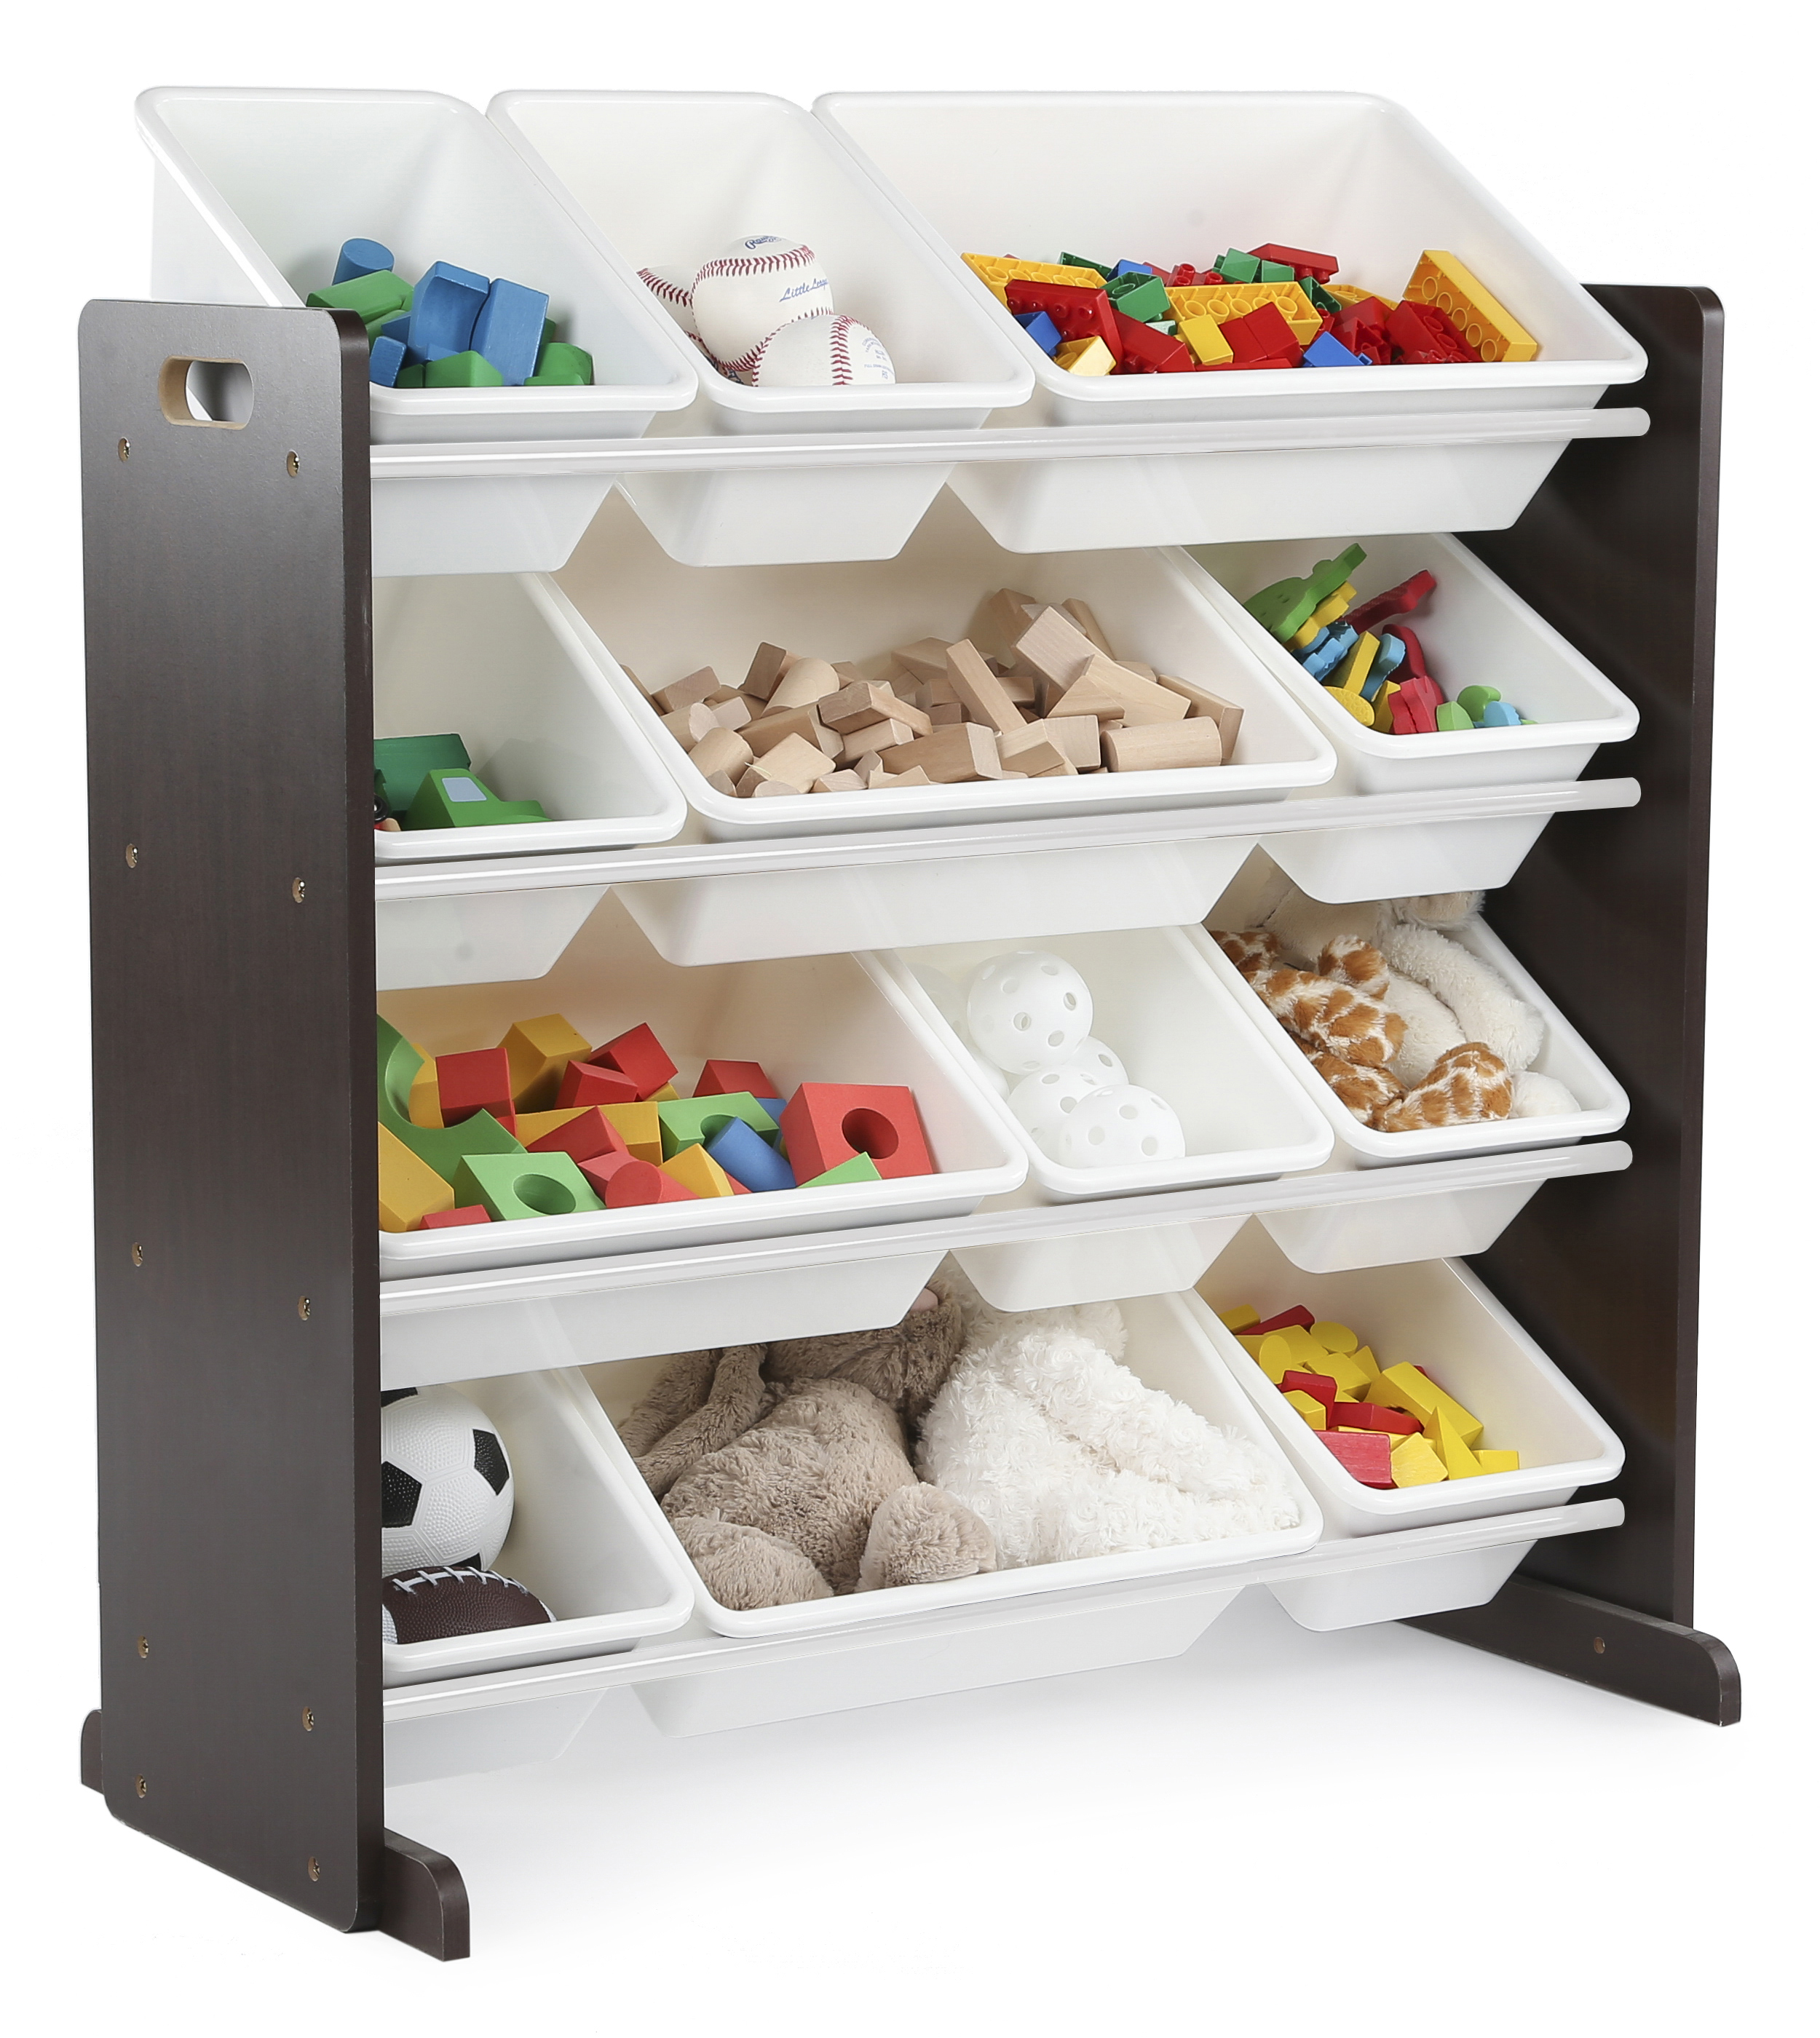 Humble Crew Children Plastic Organizing Rack with 12 Bins, Espresso and White - image 1 of 9